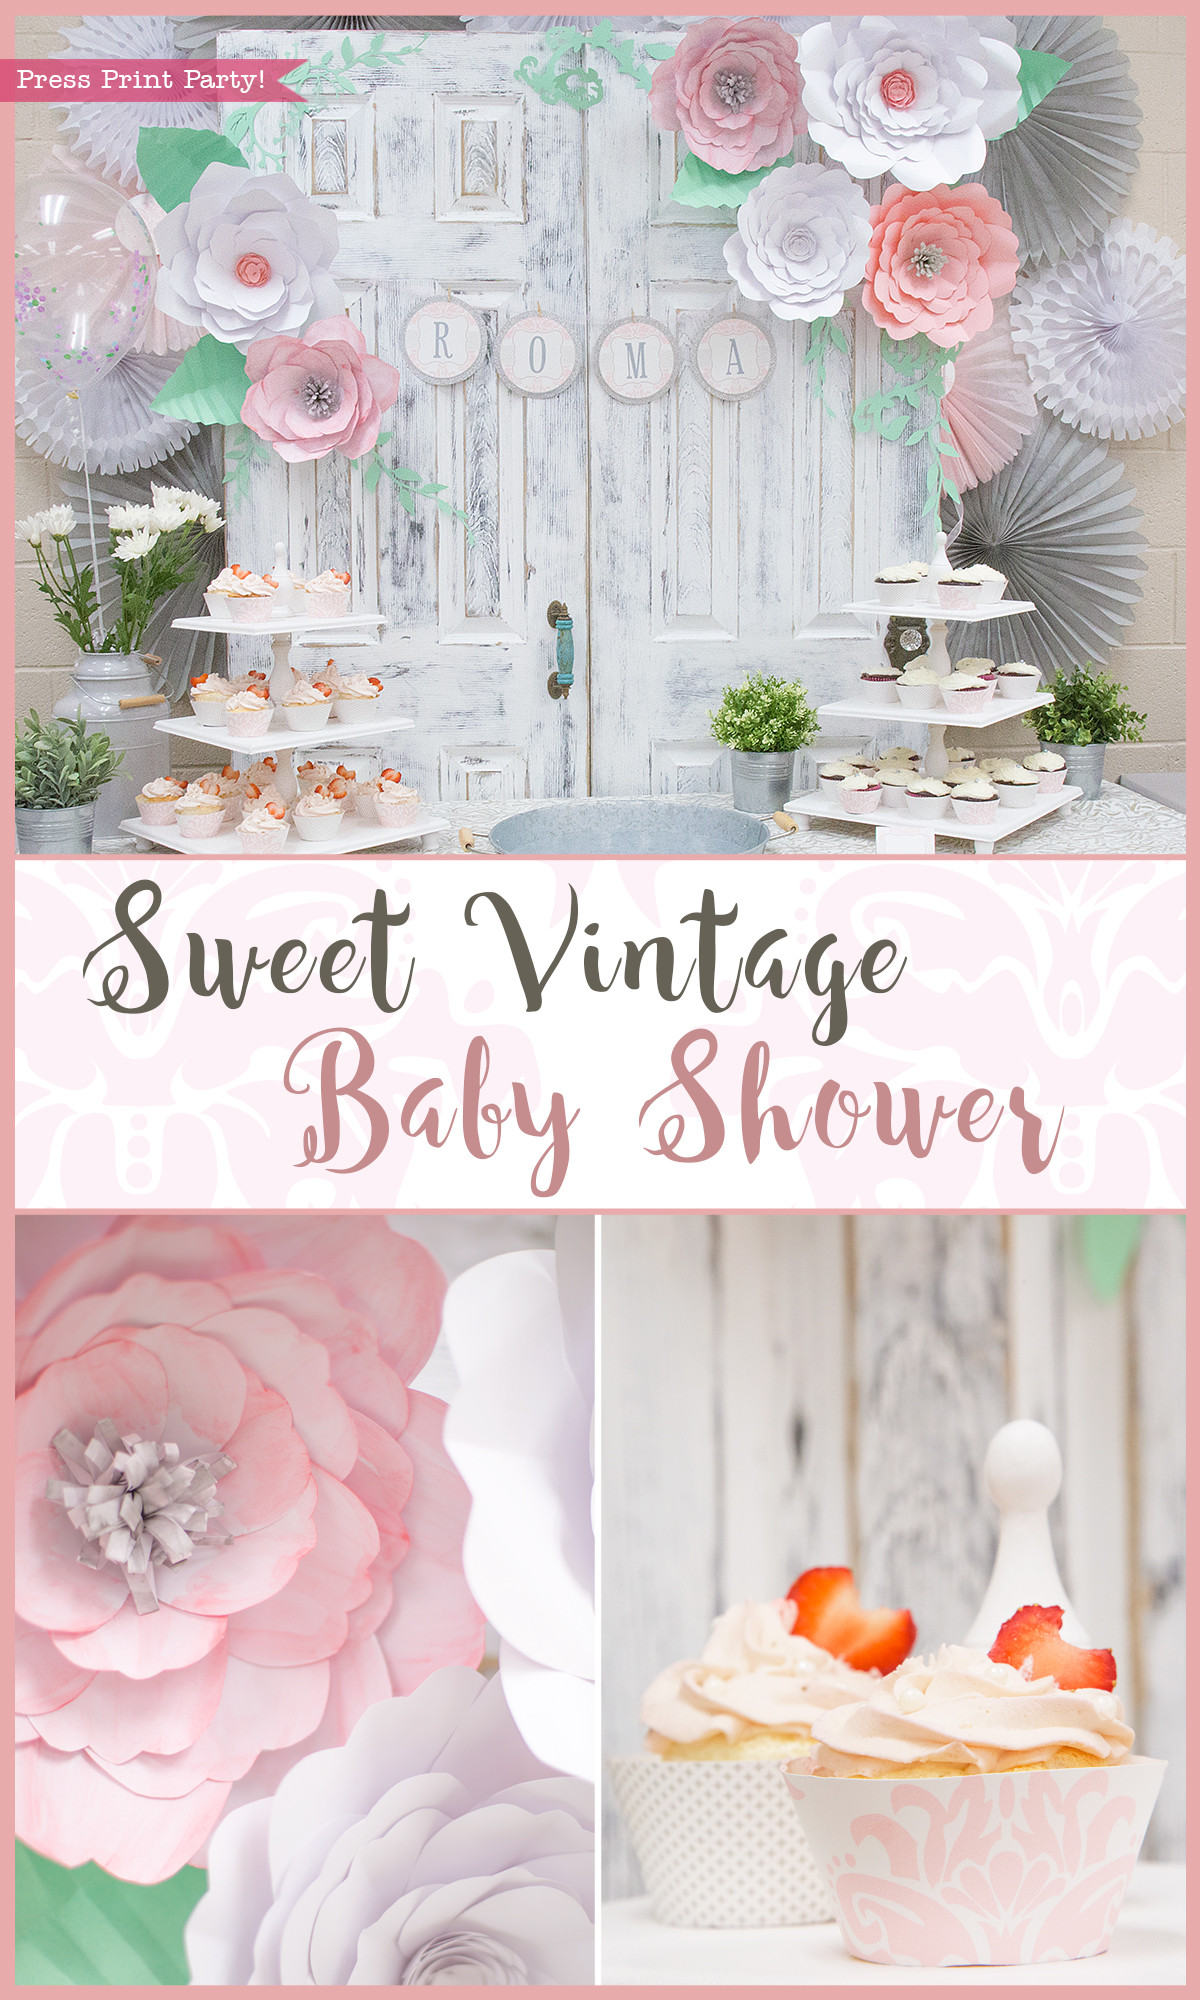 Baby Shower Decor Ideas
 A Sweet Vintage Baby Shower By Press Print Party